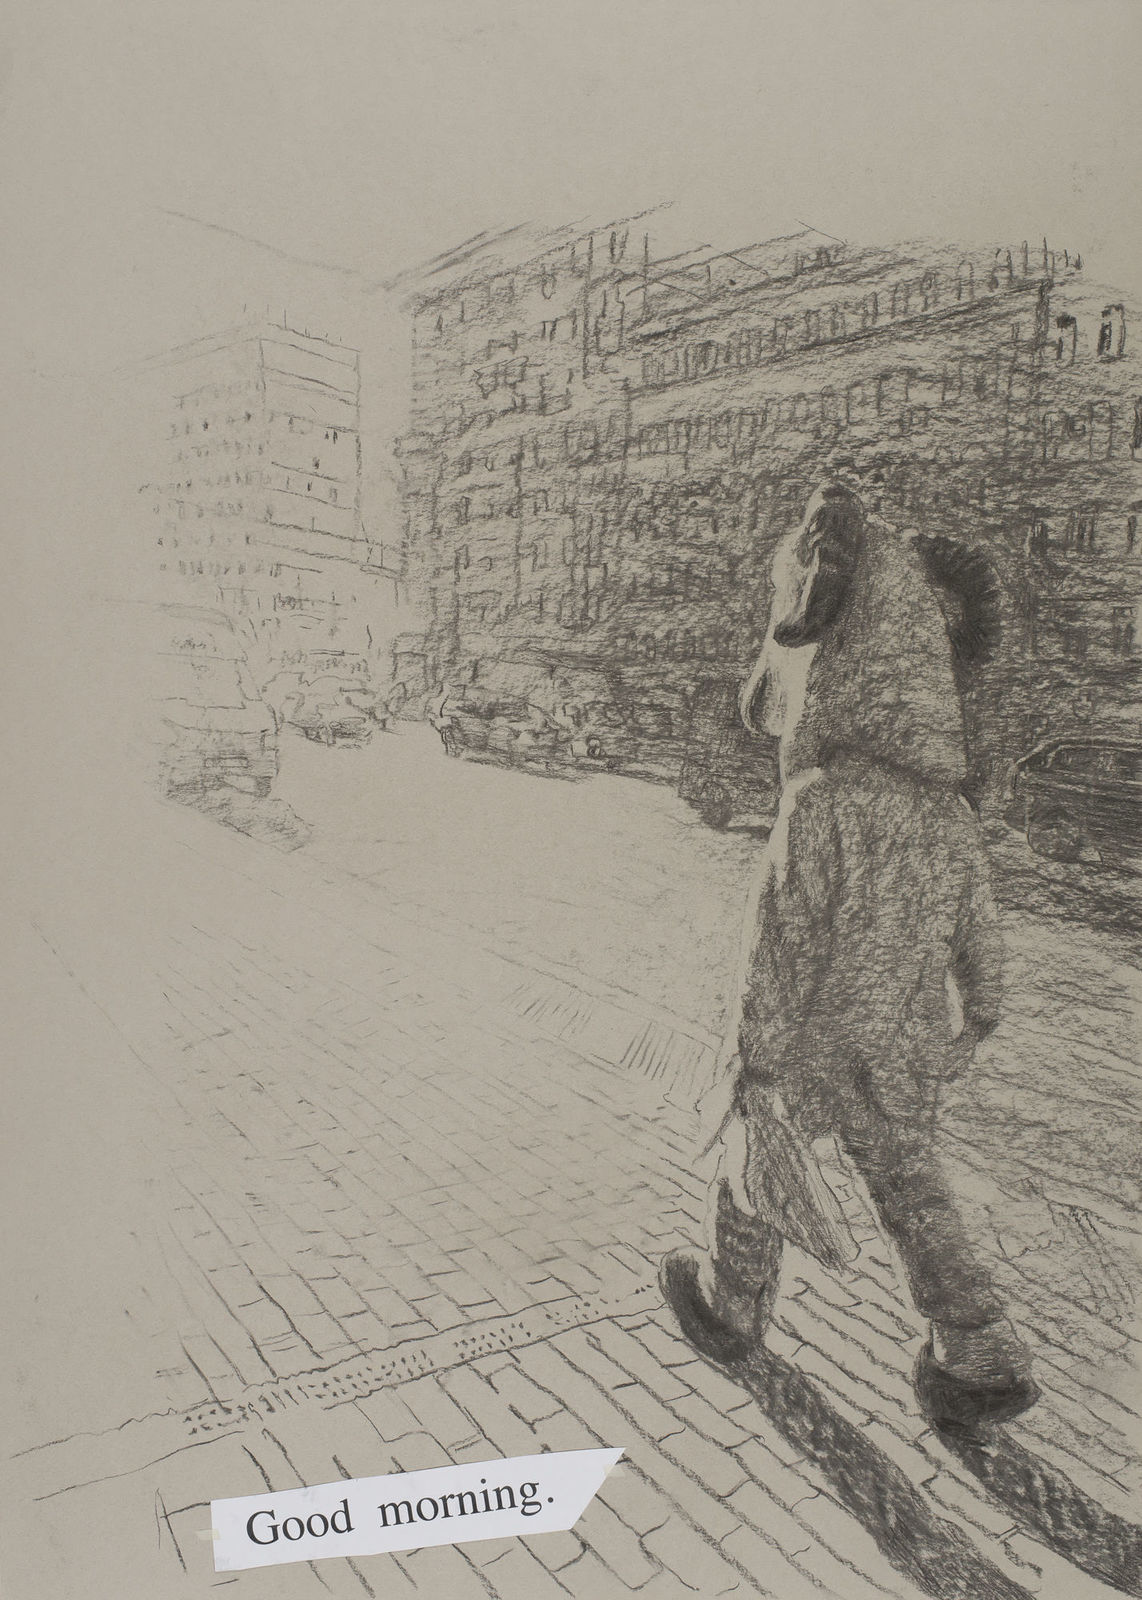 Olga Chernysheva. Untitled (Good Morning), 2015. Charcoal on paper. 84 x 60 cm.Courtesy Pace Gallery